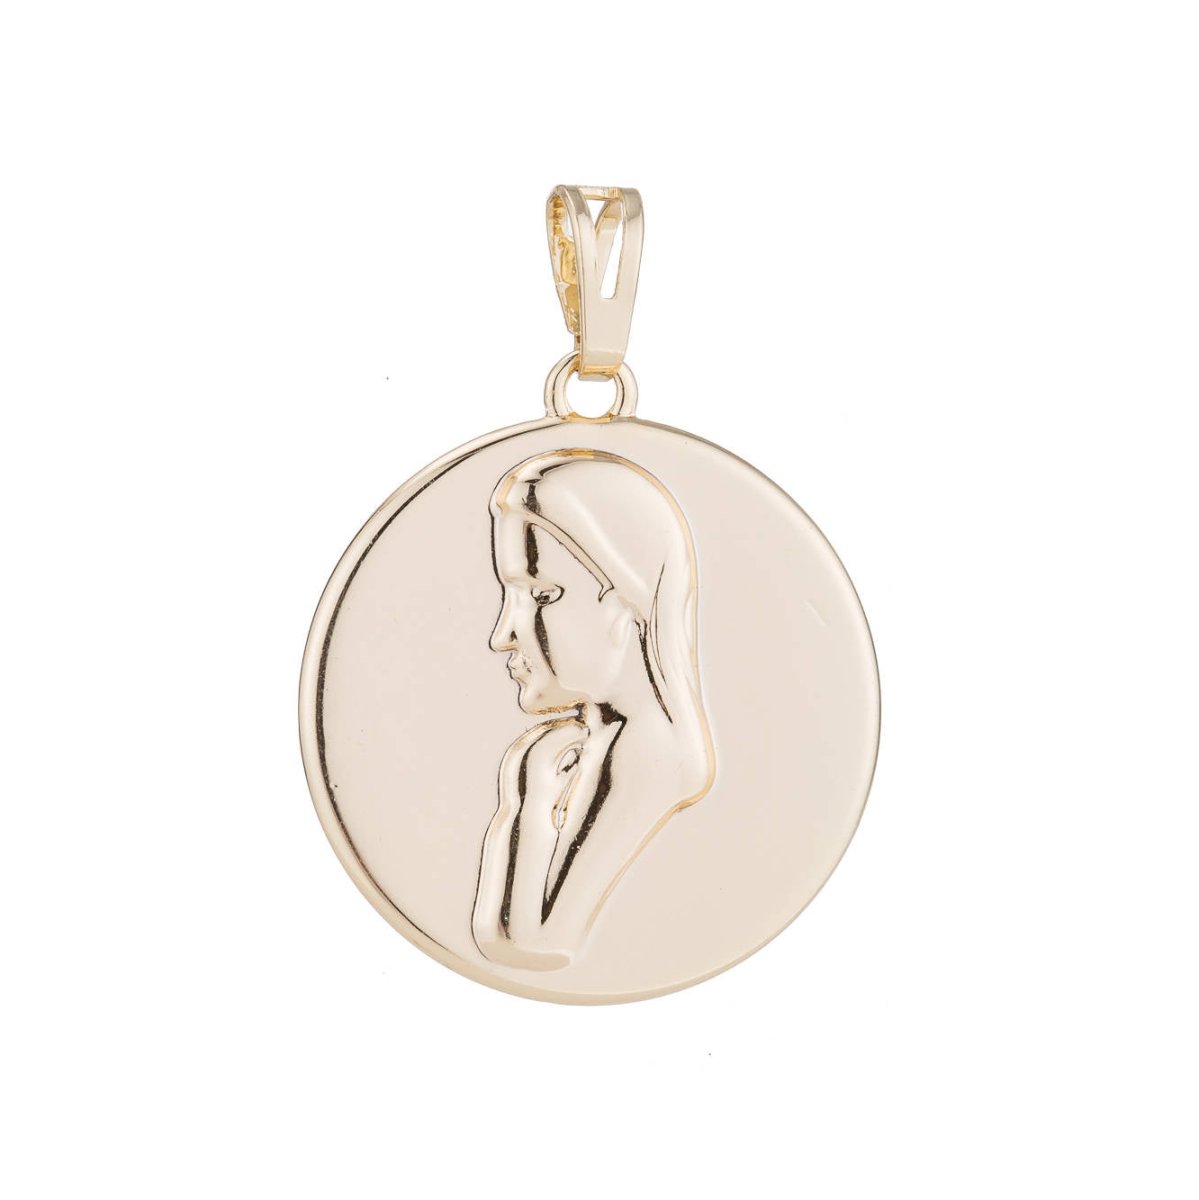 Mother Mary / Praying Lady Pendant Gold Plated Necklace - Oval Gold Pendant - Rose Gold Plated Pendant - Religious Pendant Charms J-747 - DLUXCA